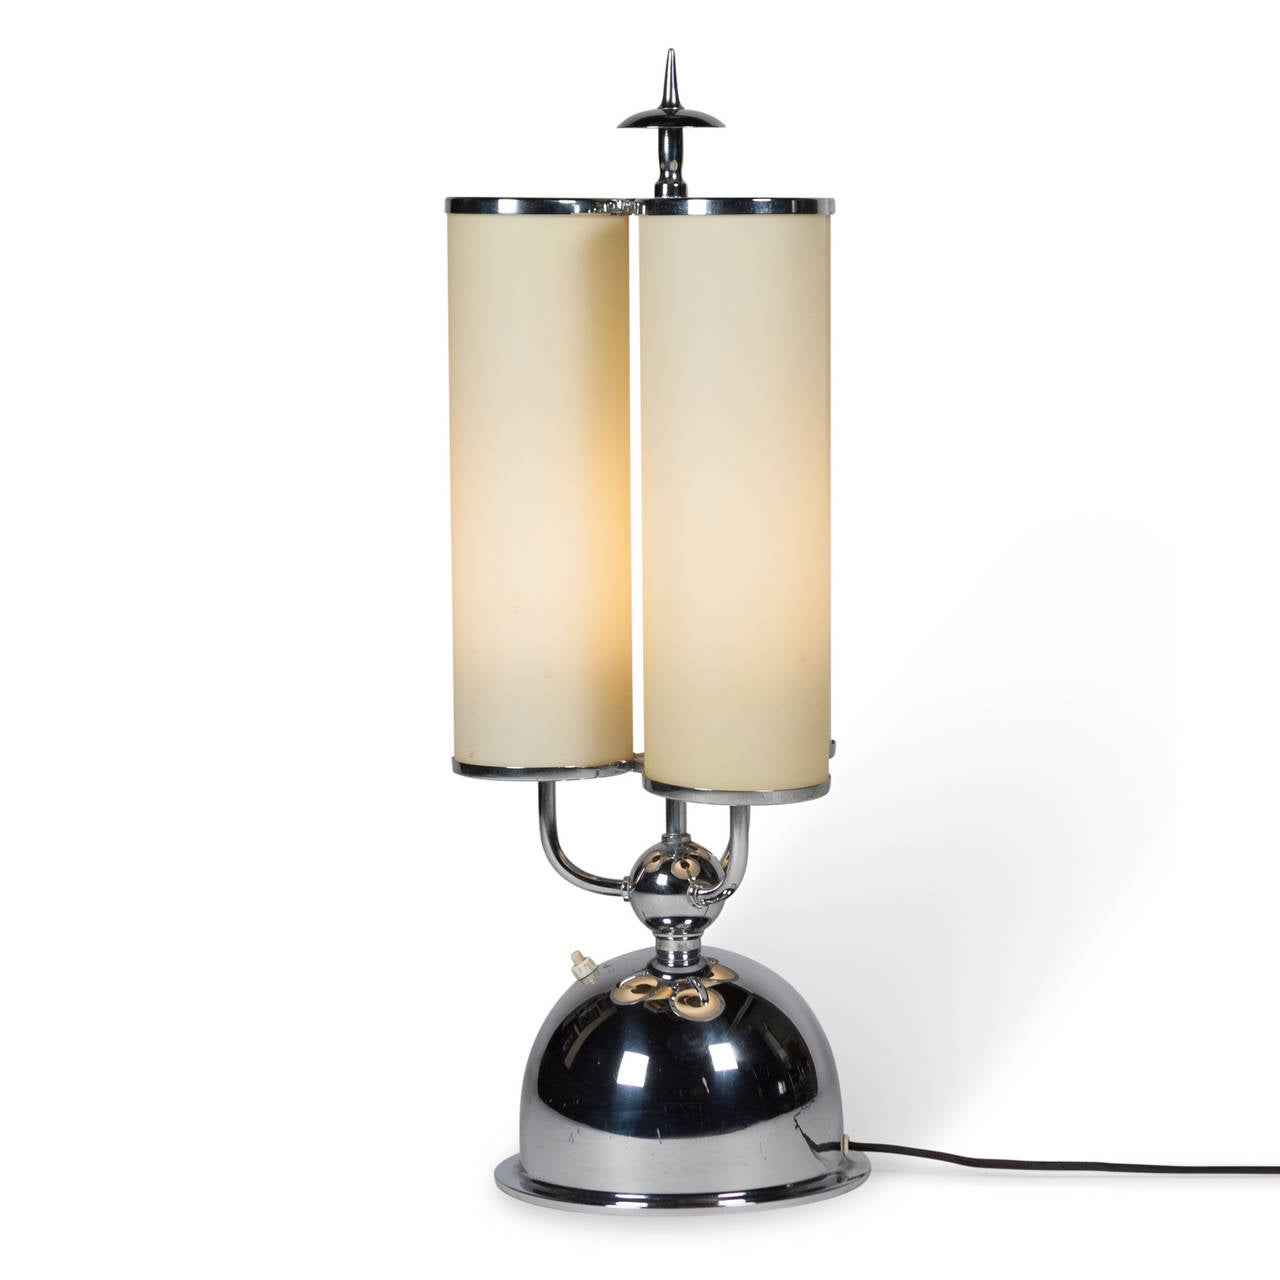 Mid-20th Century Glass Tube and Chrome Table Lamp by Fritz Breuhaus, German, circa 1930 For Sale